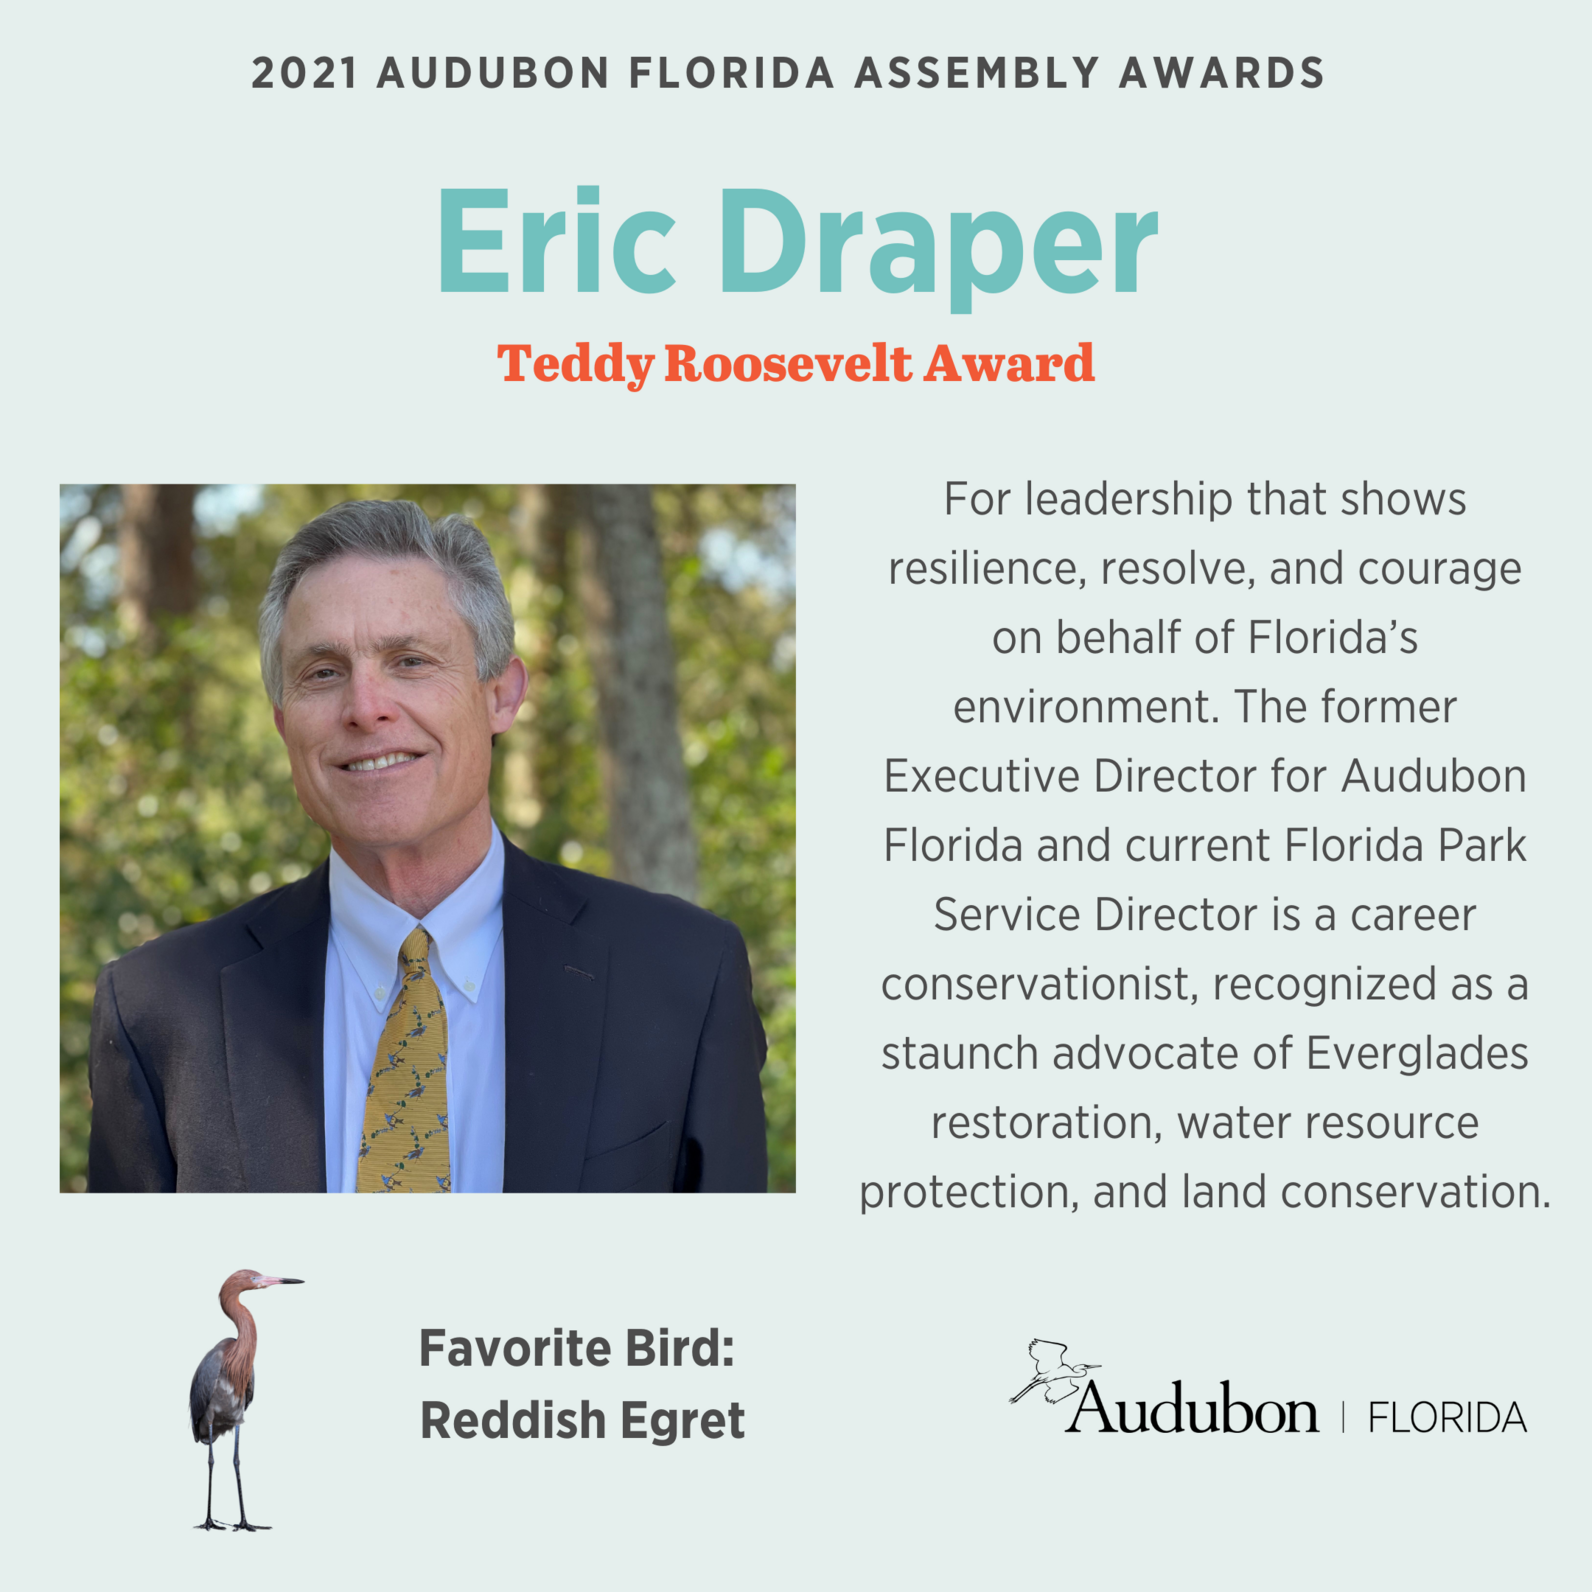 Graphic of Eric Draper, with his favorite bird - a Reddish Egret - and repeated language from the article about why he won the award.